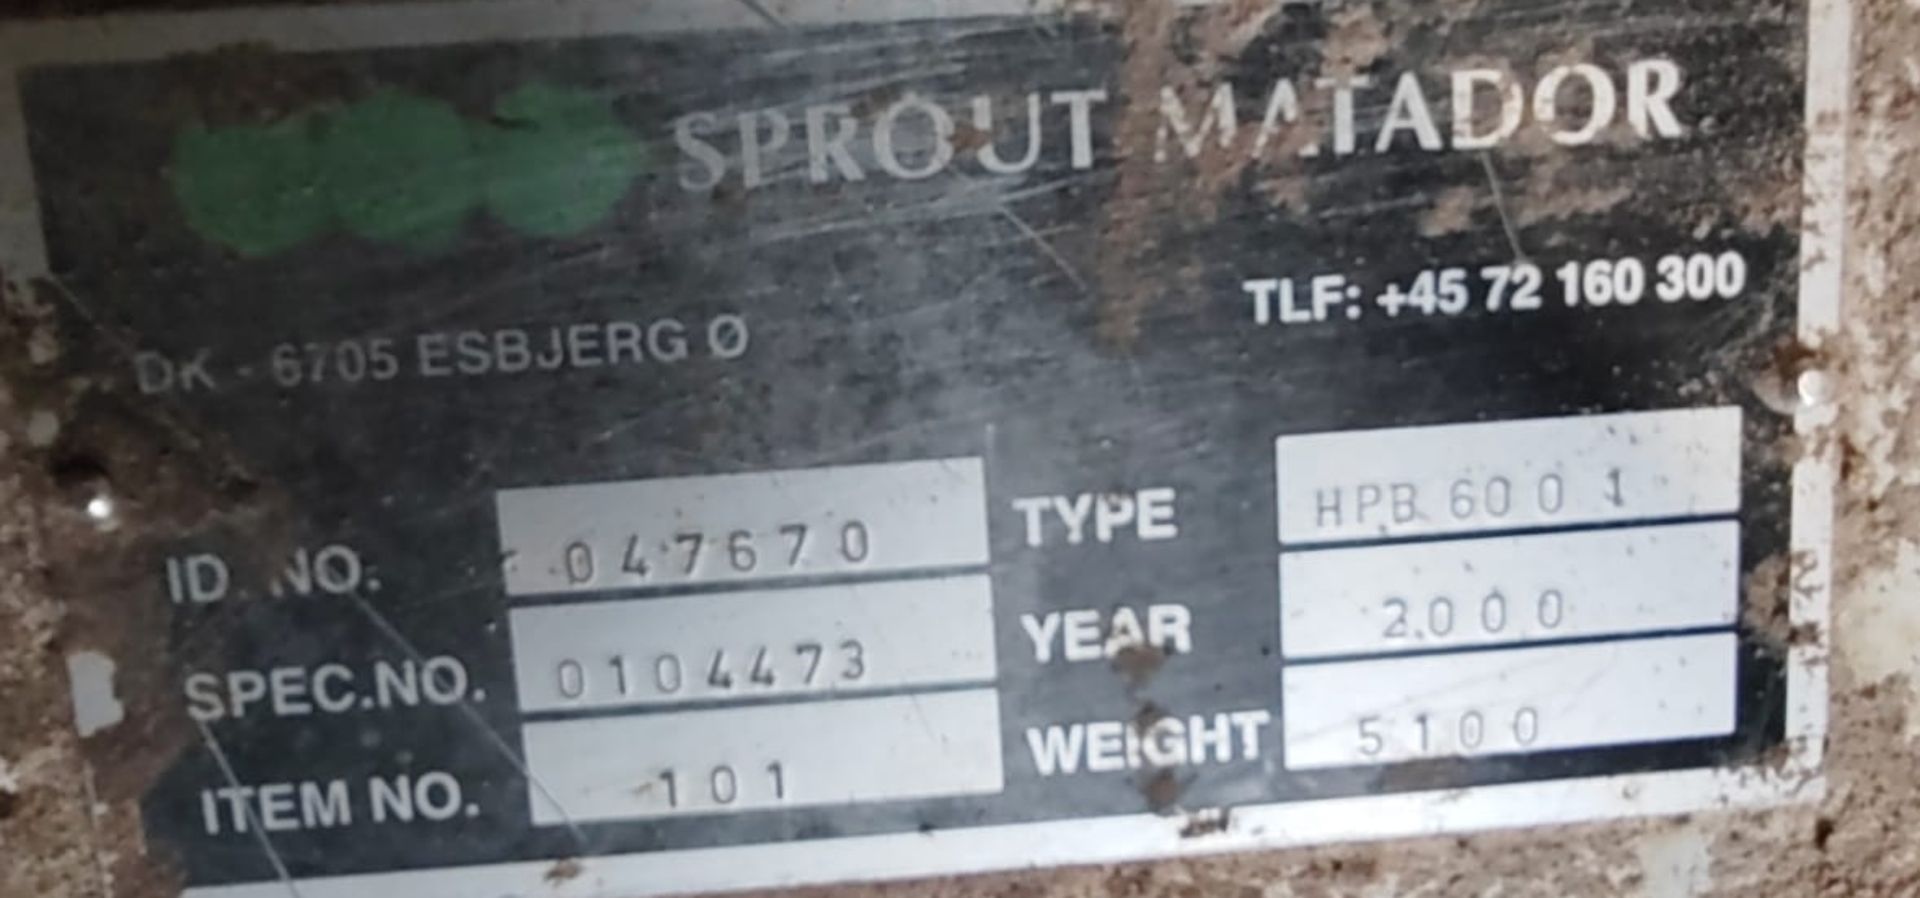 Sprout Matador HPB 600 1 STAINLESS STEEL 3TONNE THREE TIER HORIZONTAL PADDLE MIXER, year of - Image 3 of 28